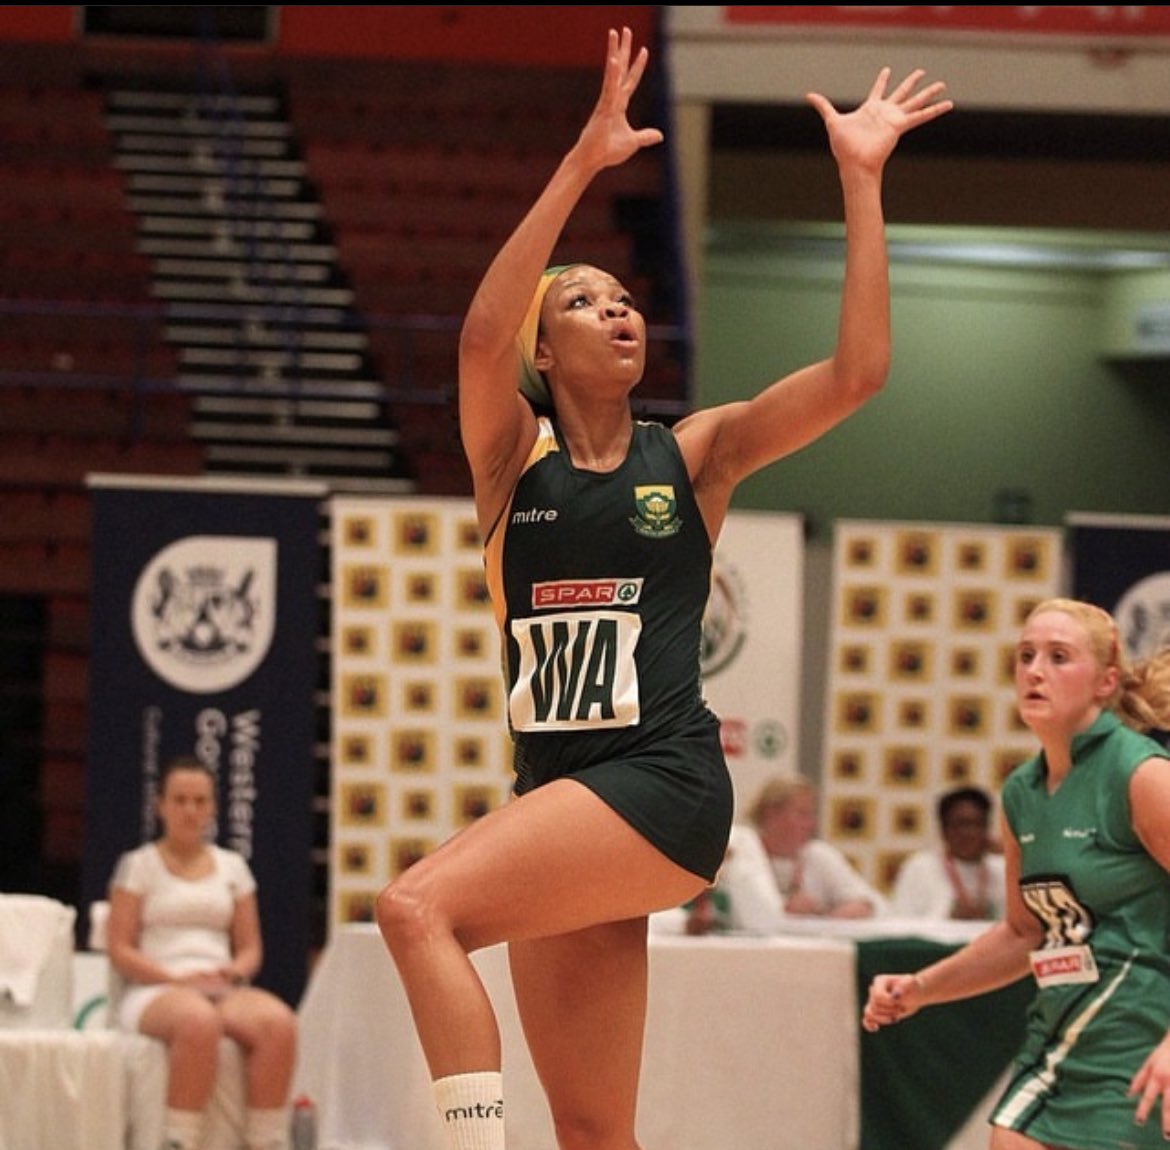 Transitioning seamlessly from player to coach, the legendary Zanele Mdodana continues to redefine the game of netball in South Africa. A true trailblazer on and off the court. #FreedomInSport gsport.co.za/zanele-mdodana…